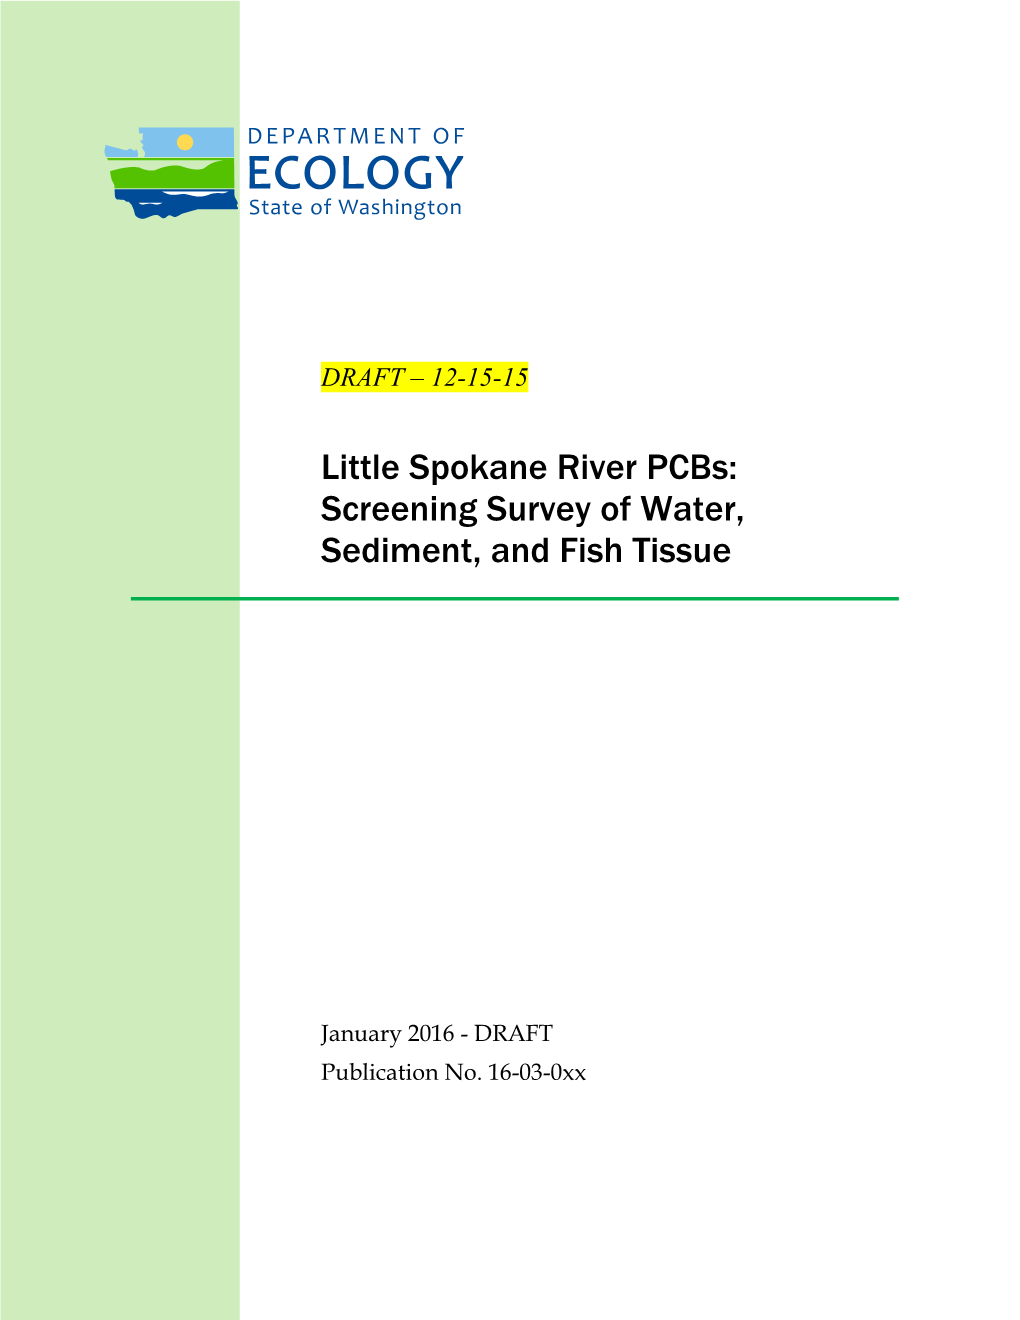 Little Spokane River Pcbs: Screening Survey of Water, Sediment, and Fish Tissue